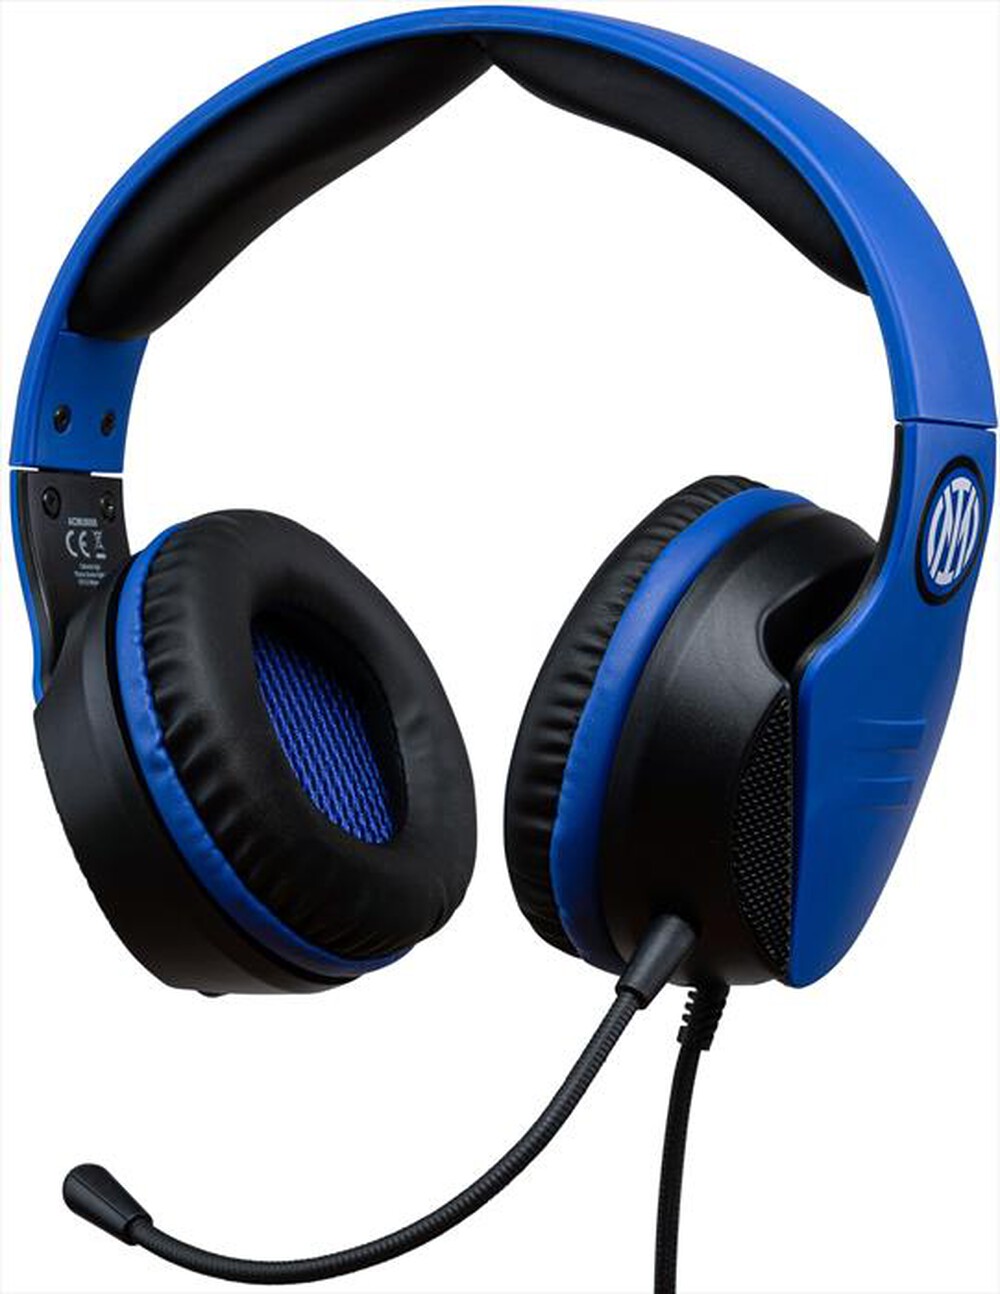 "QUBICK - WIRED GAMING HEADSET INTER 2.0"